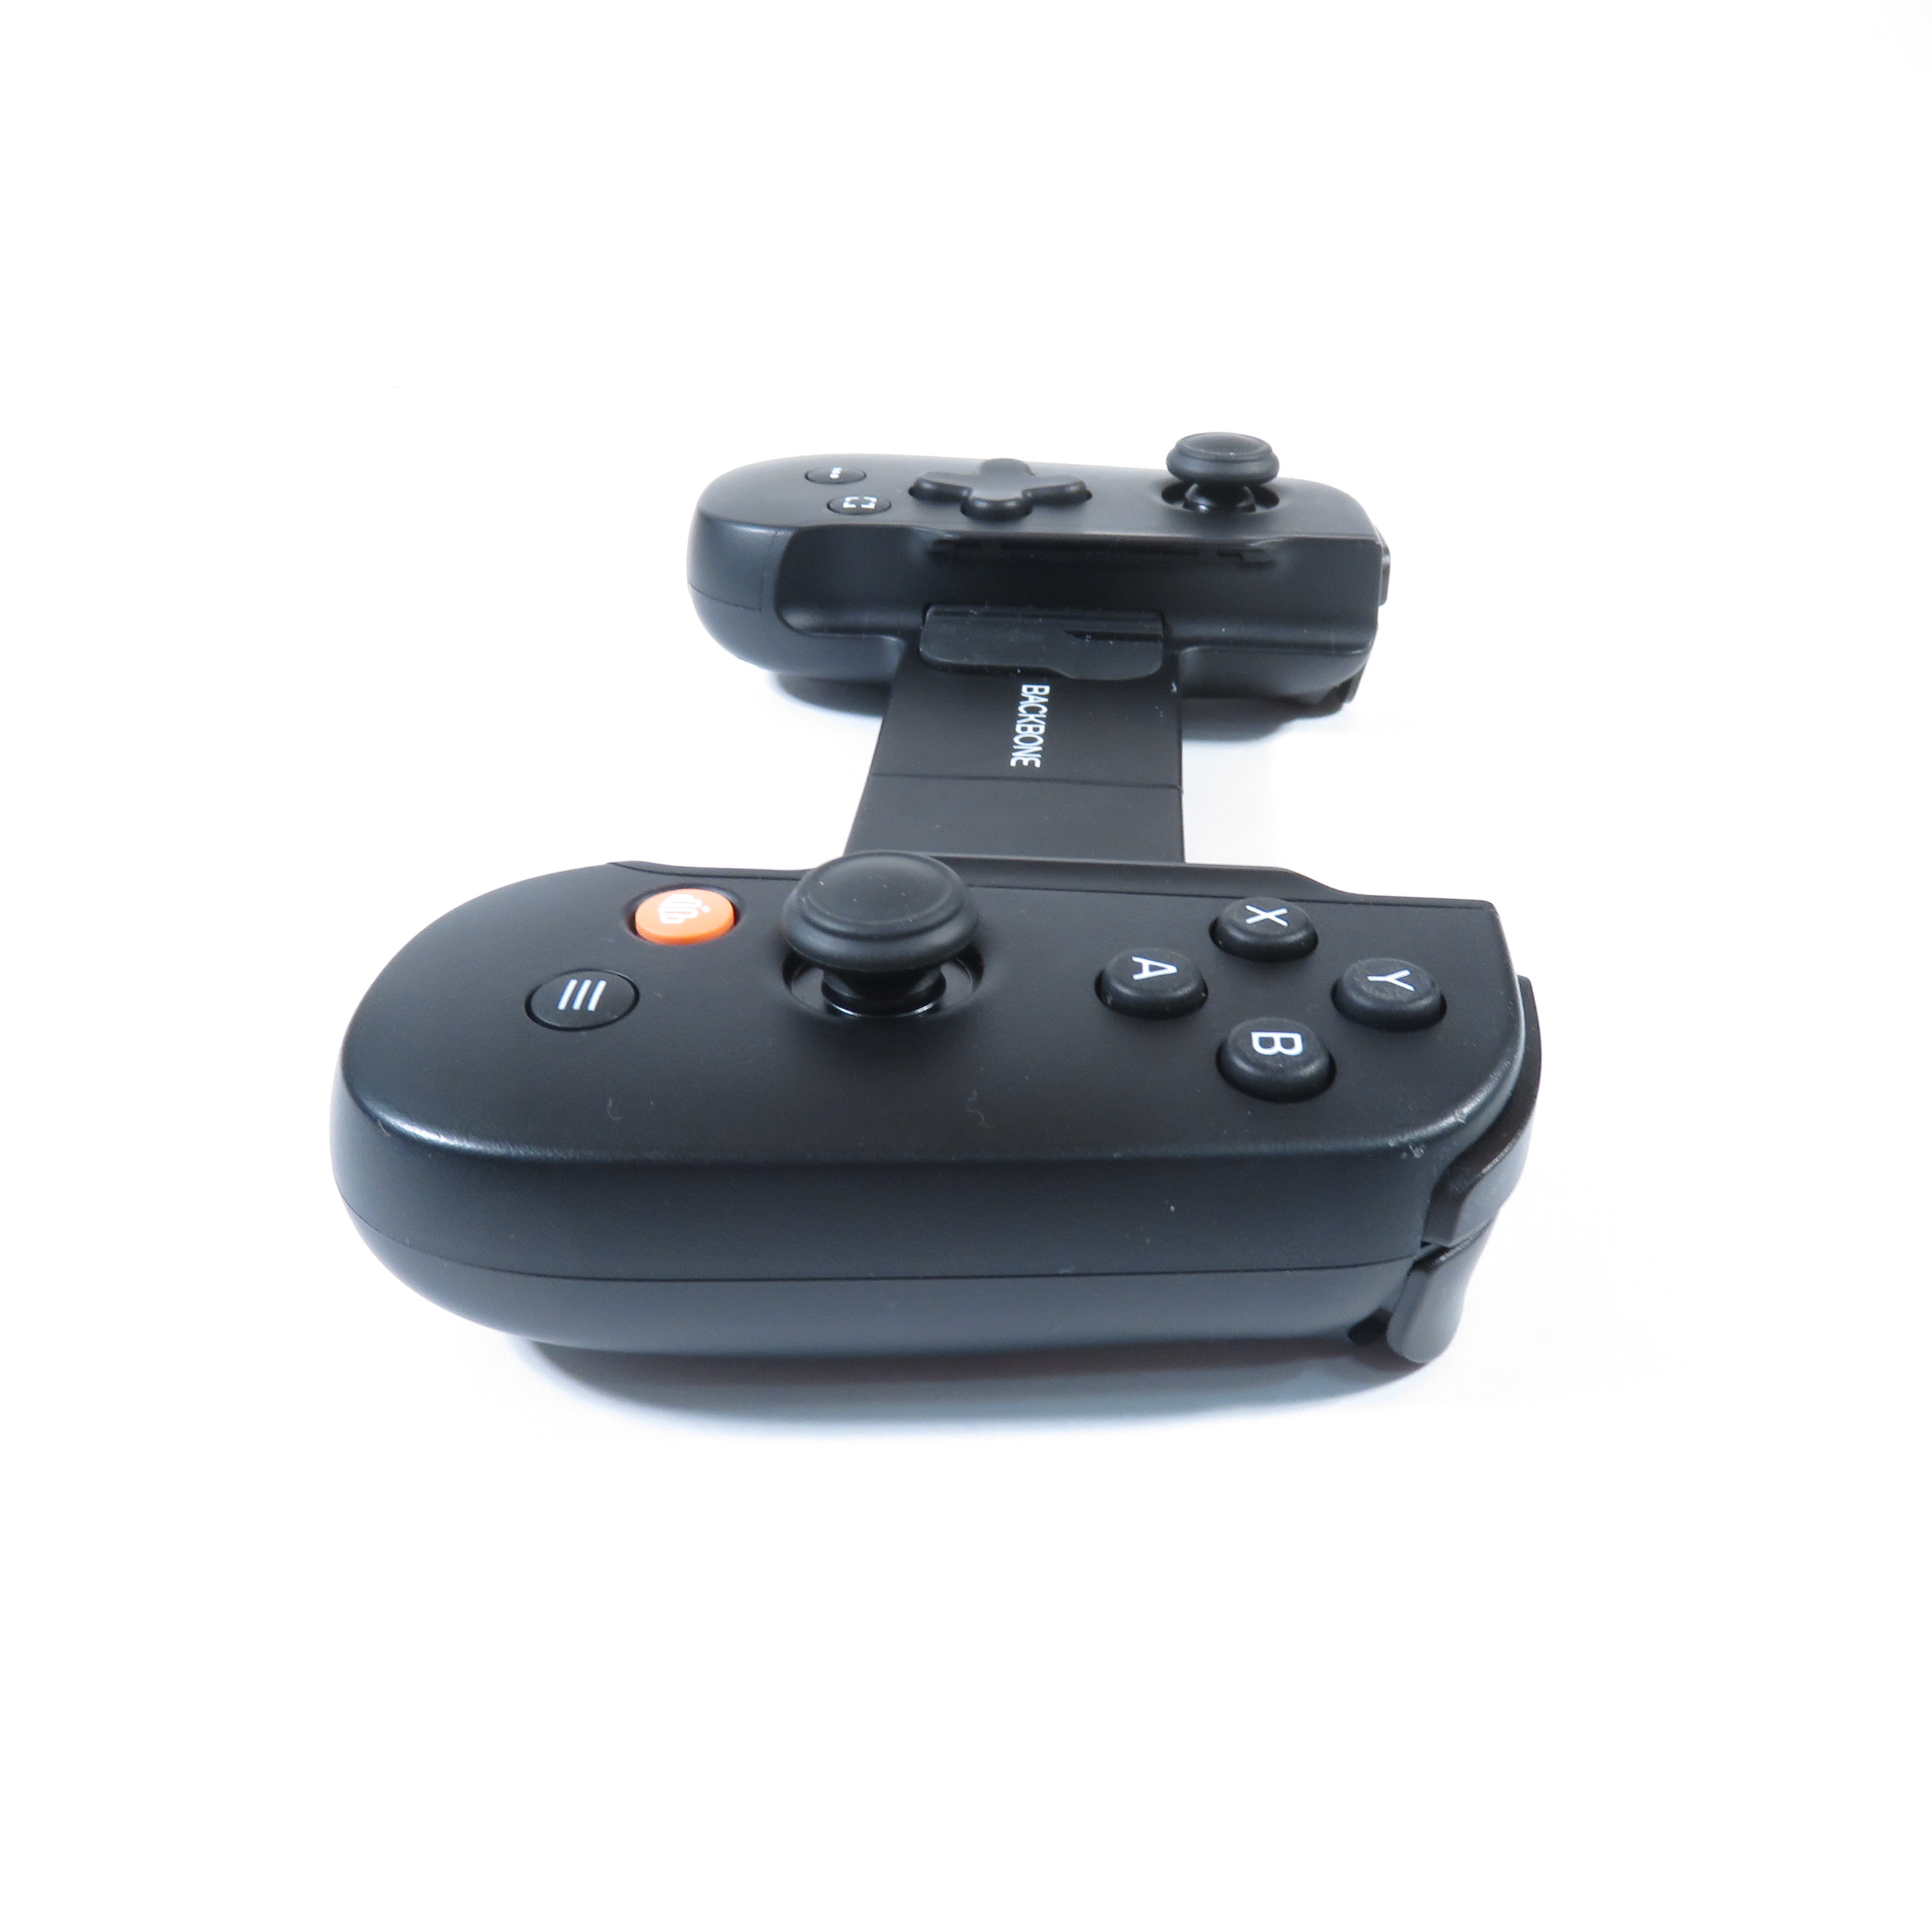 Backbone One BB-51 USB-C Low-Latency Mobile Gaming Controller